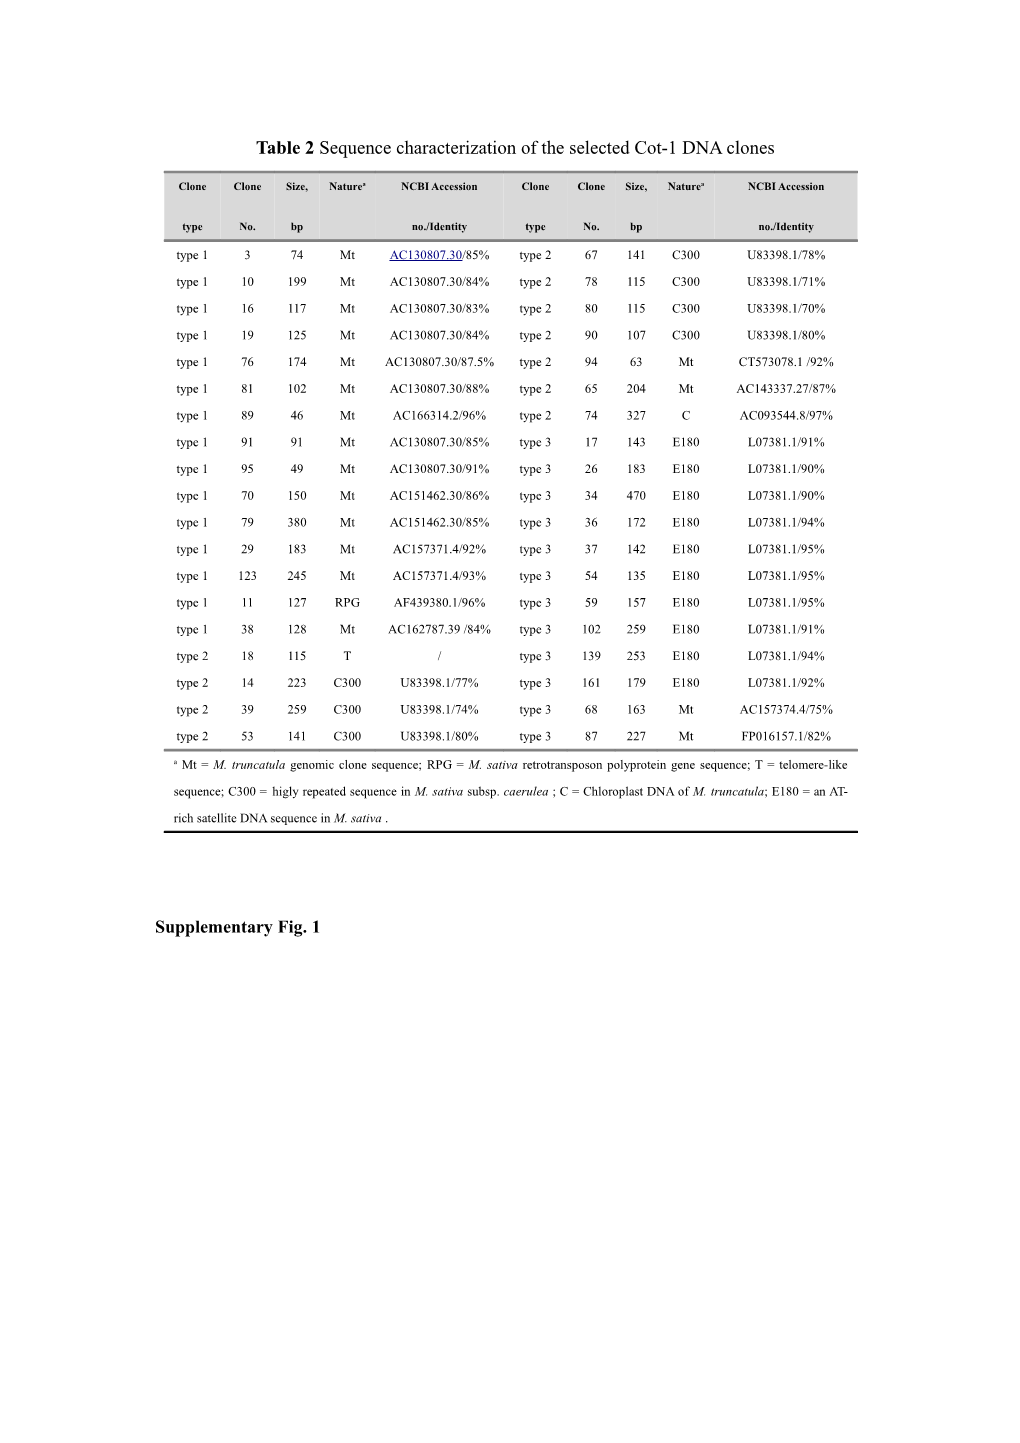 Table 2 Sequence Characterization of the Selected Cot-1 DNA Clones